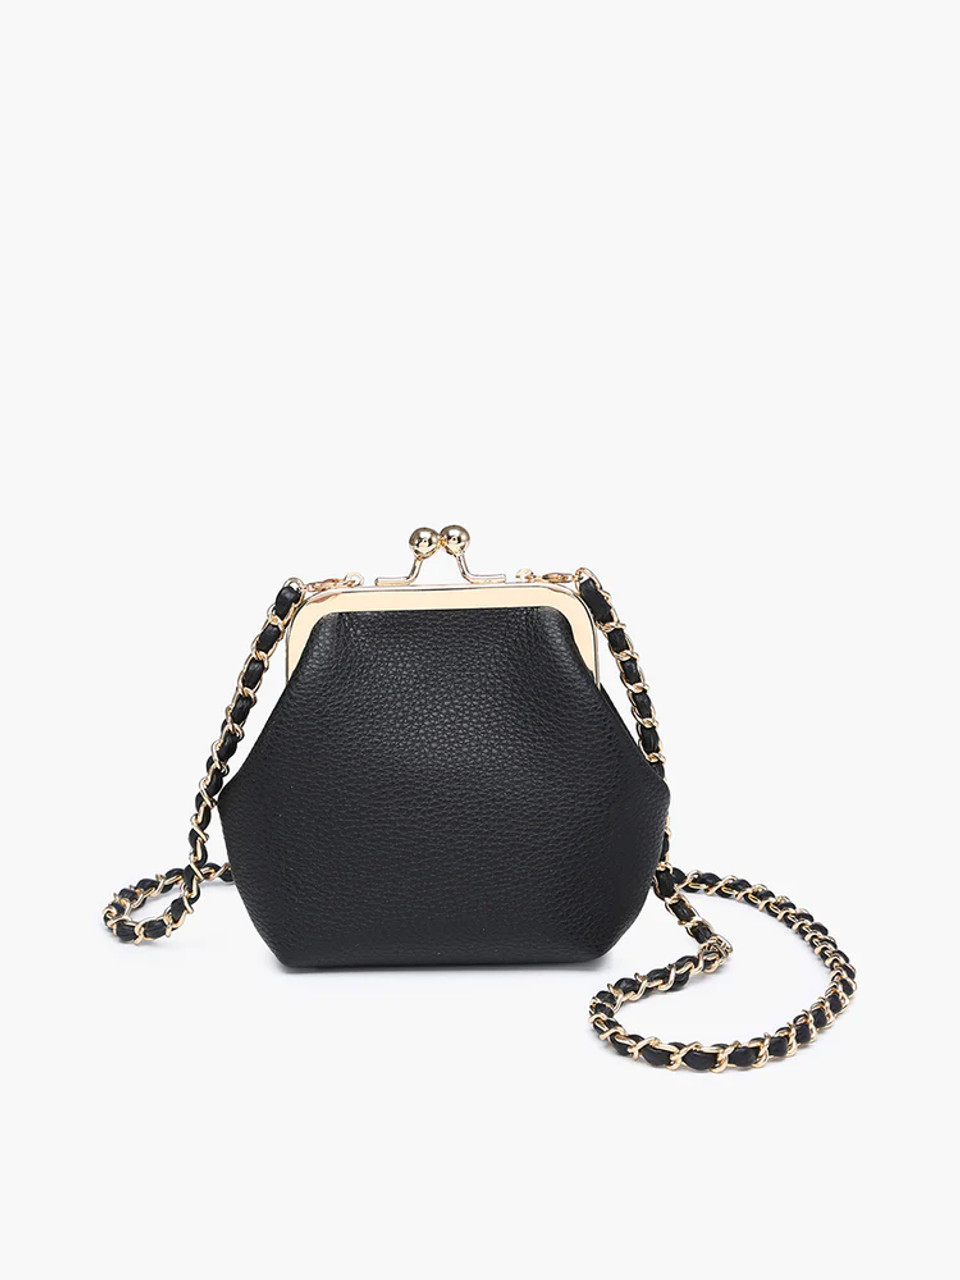 Coin Purse - Black Classic Leather